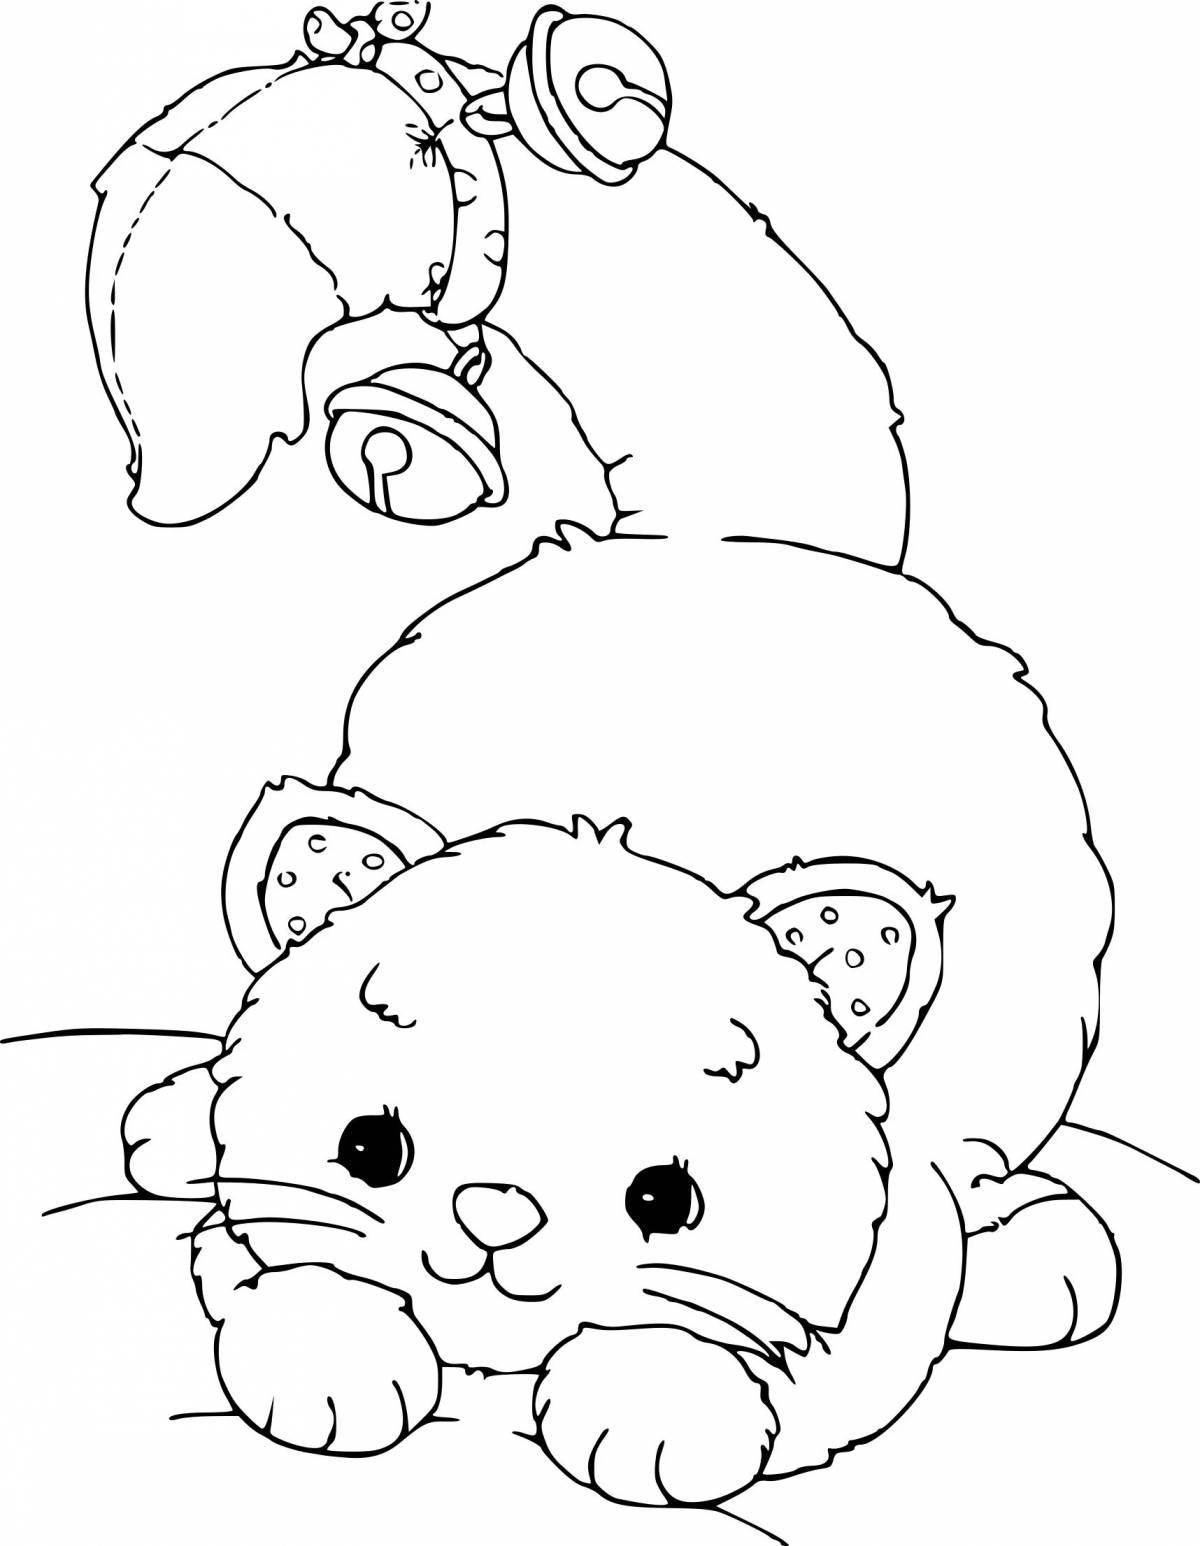 A striking snow leopard coloring page